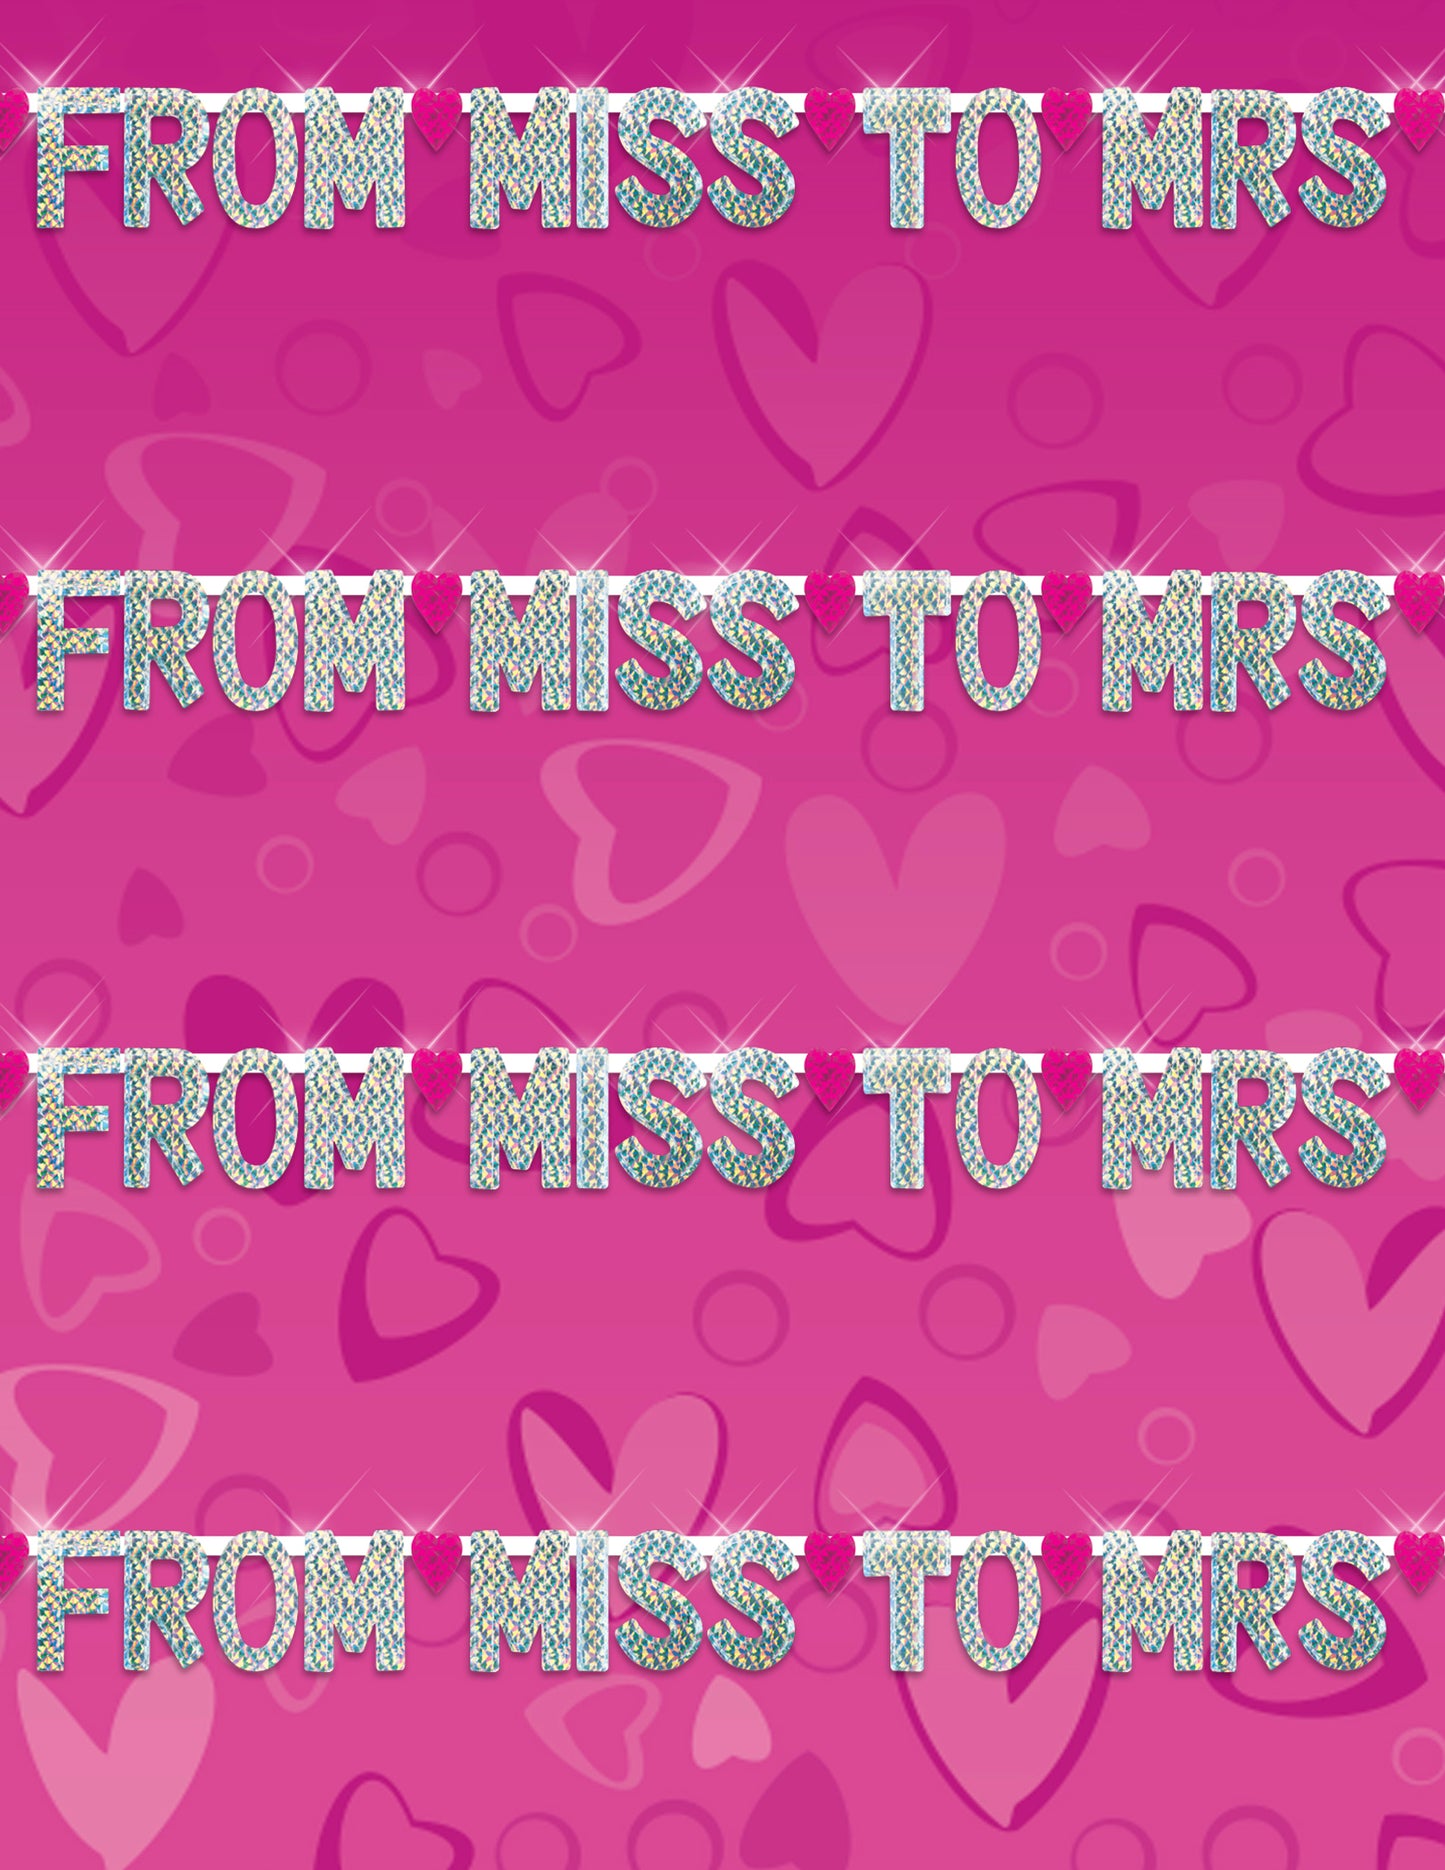 Favors "From Miss to Mrs" Party Banner